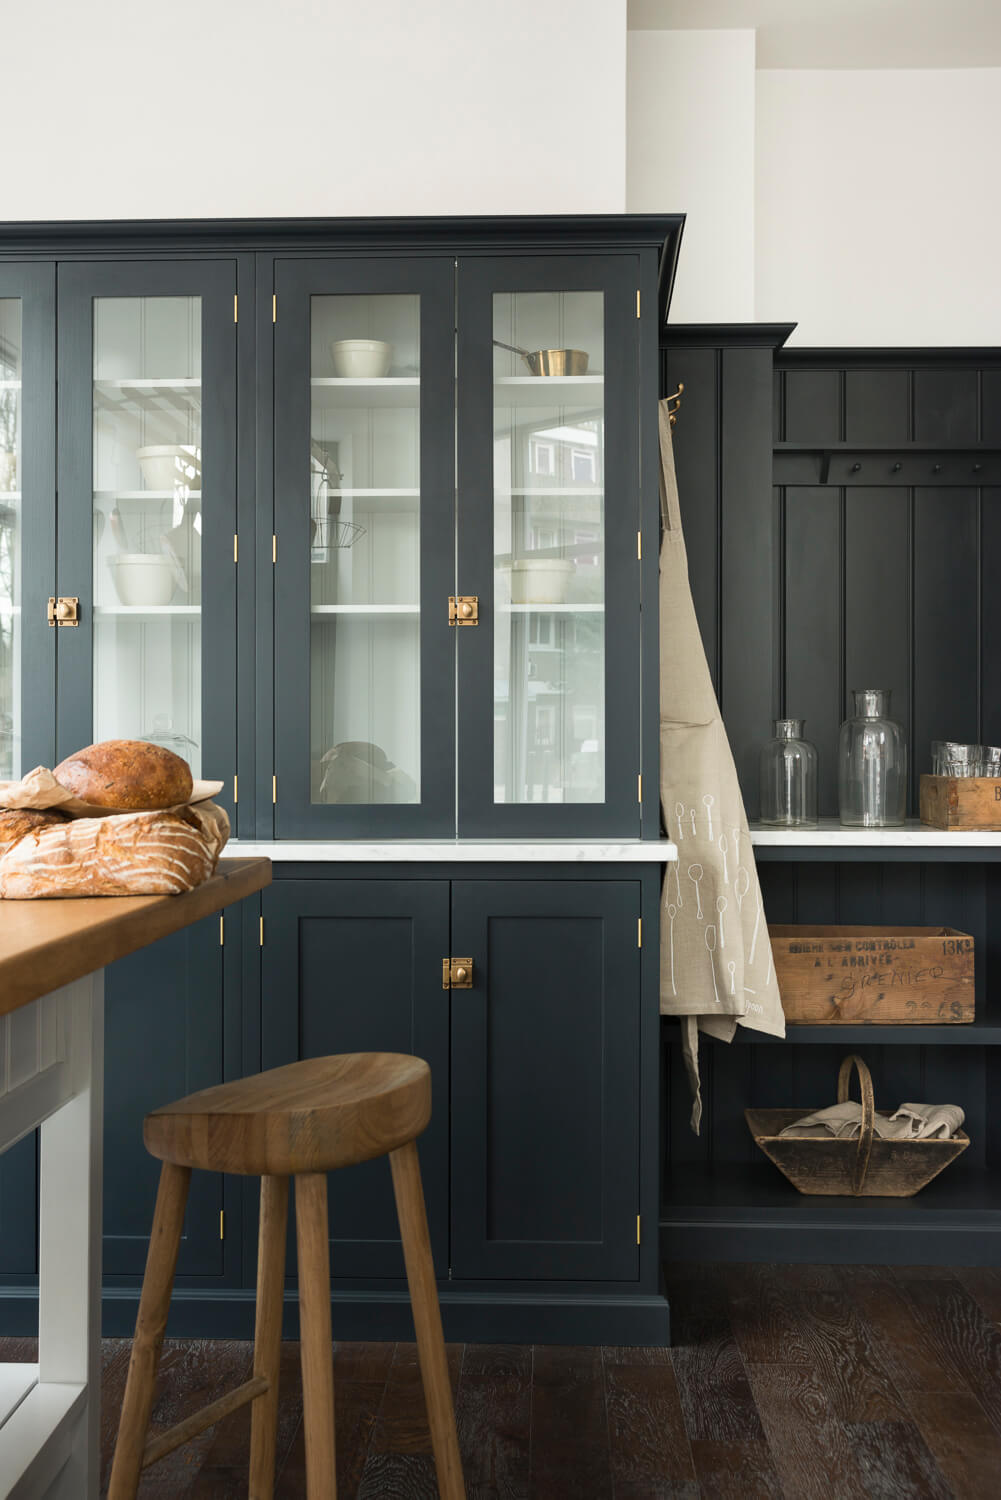 before 14.TheRealShakerKitchen deVOL LOW RES A Warm Makeover For A deVOL Shaker Kitchen